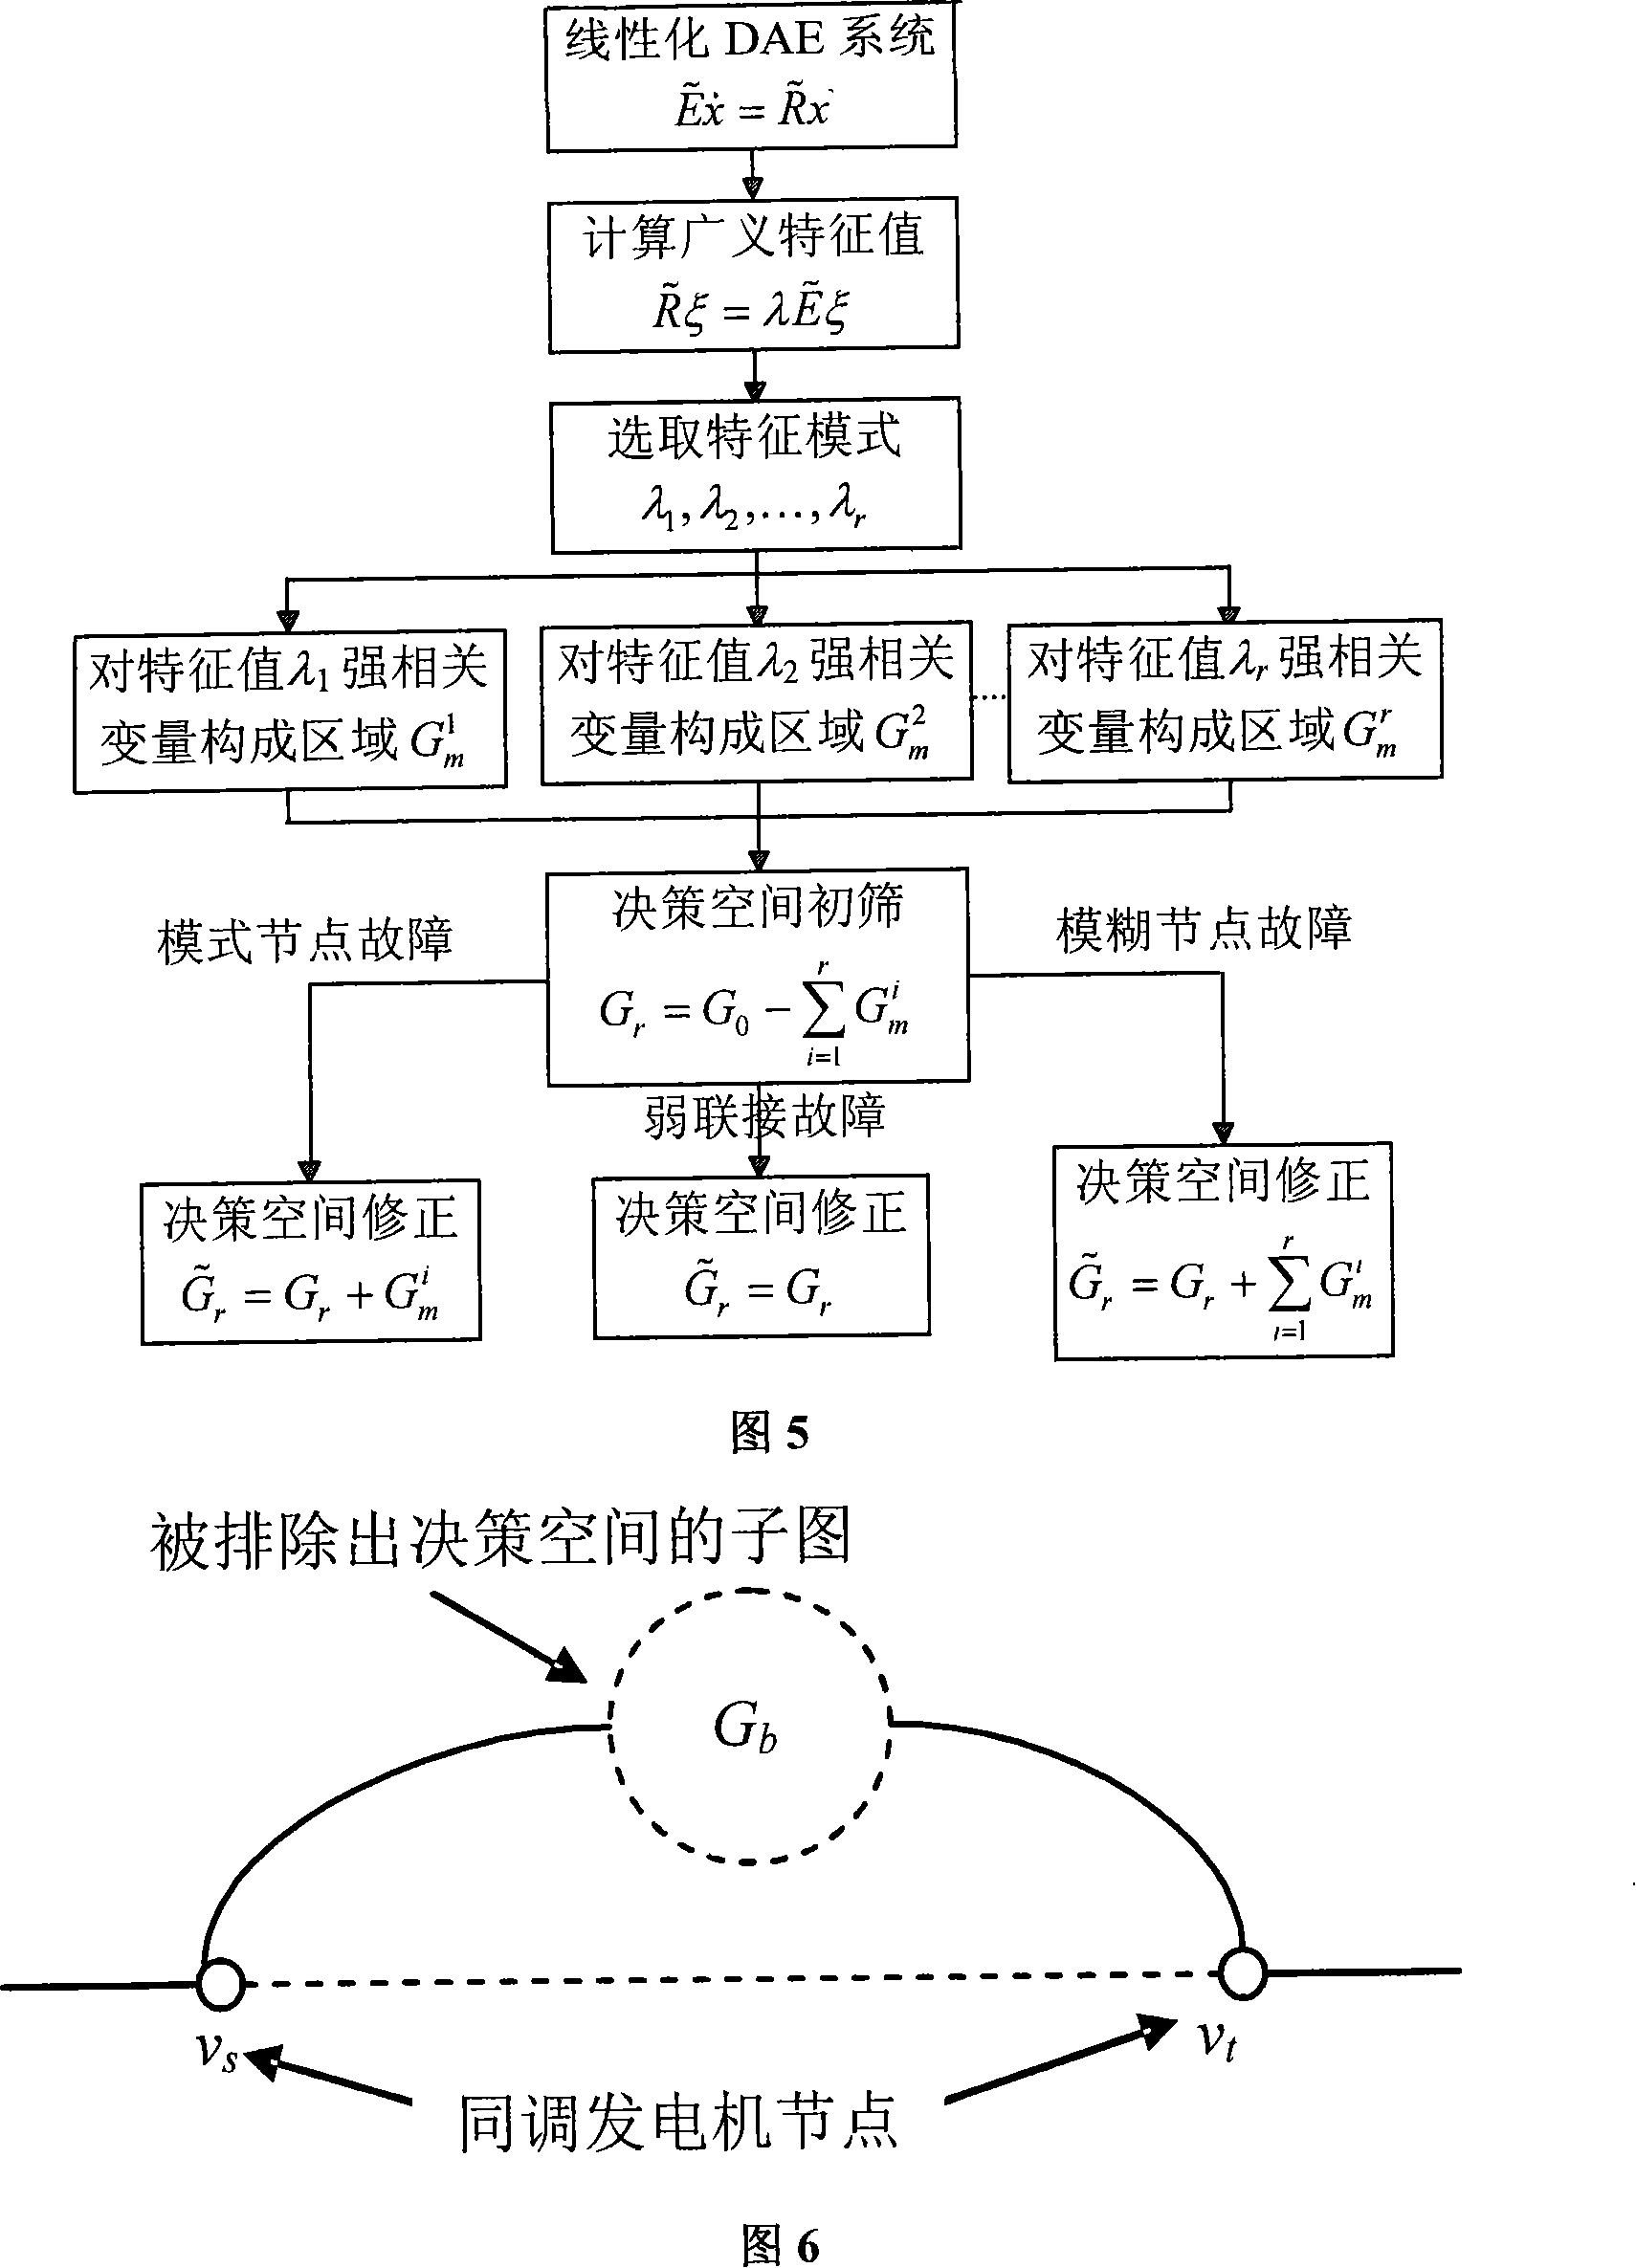 Power system separation decision space screening method